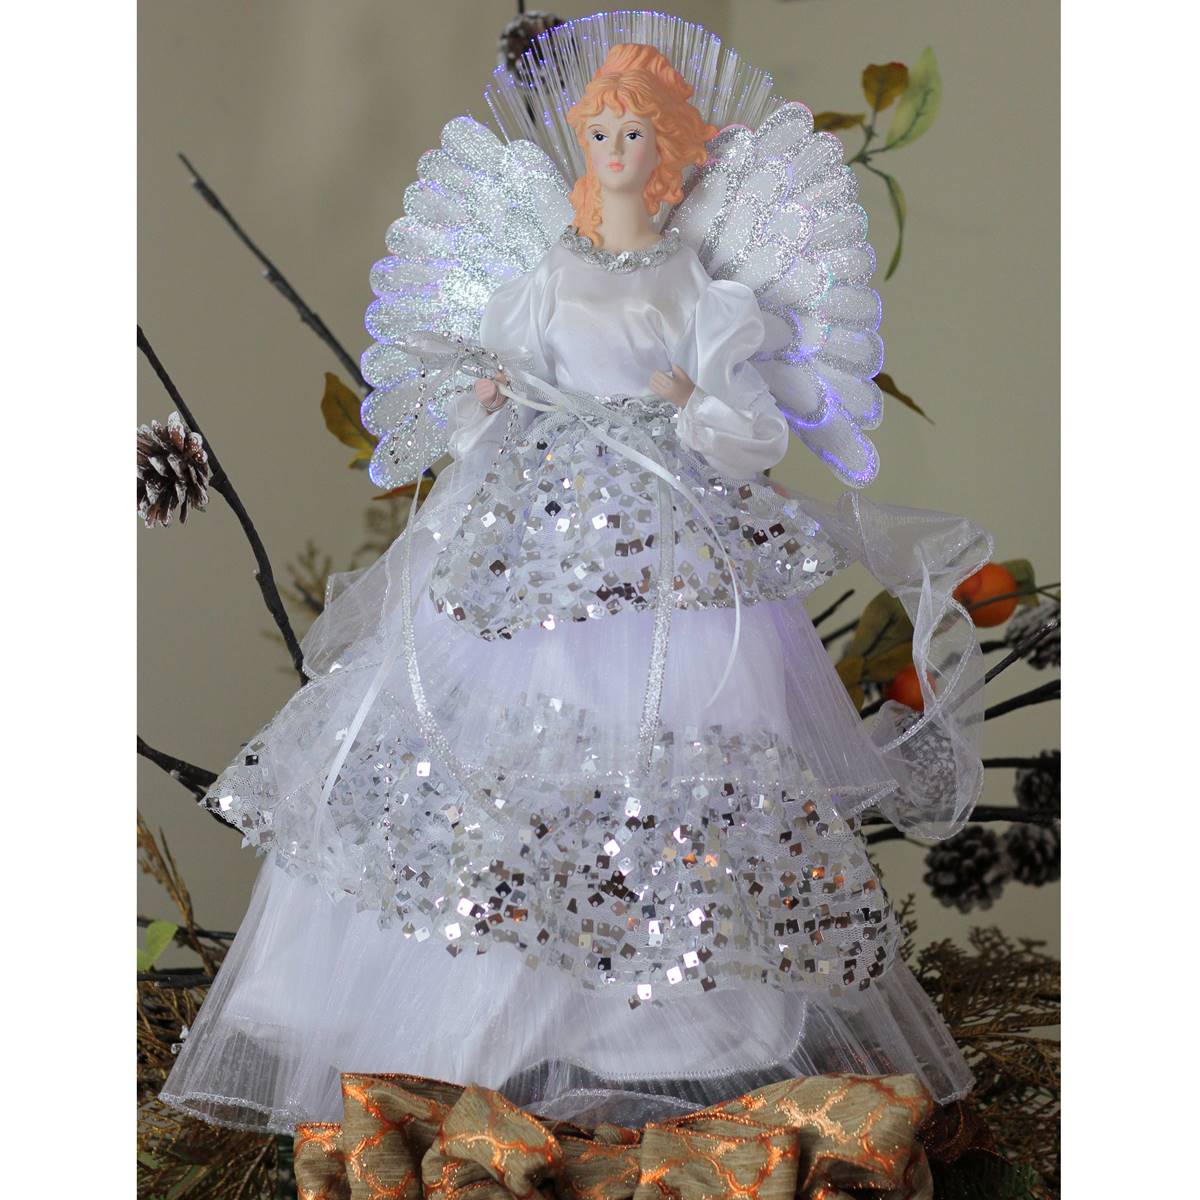 Northlight 16in. Fiber Optic Angel In Silver Gown Tree Topper